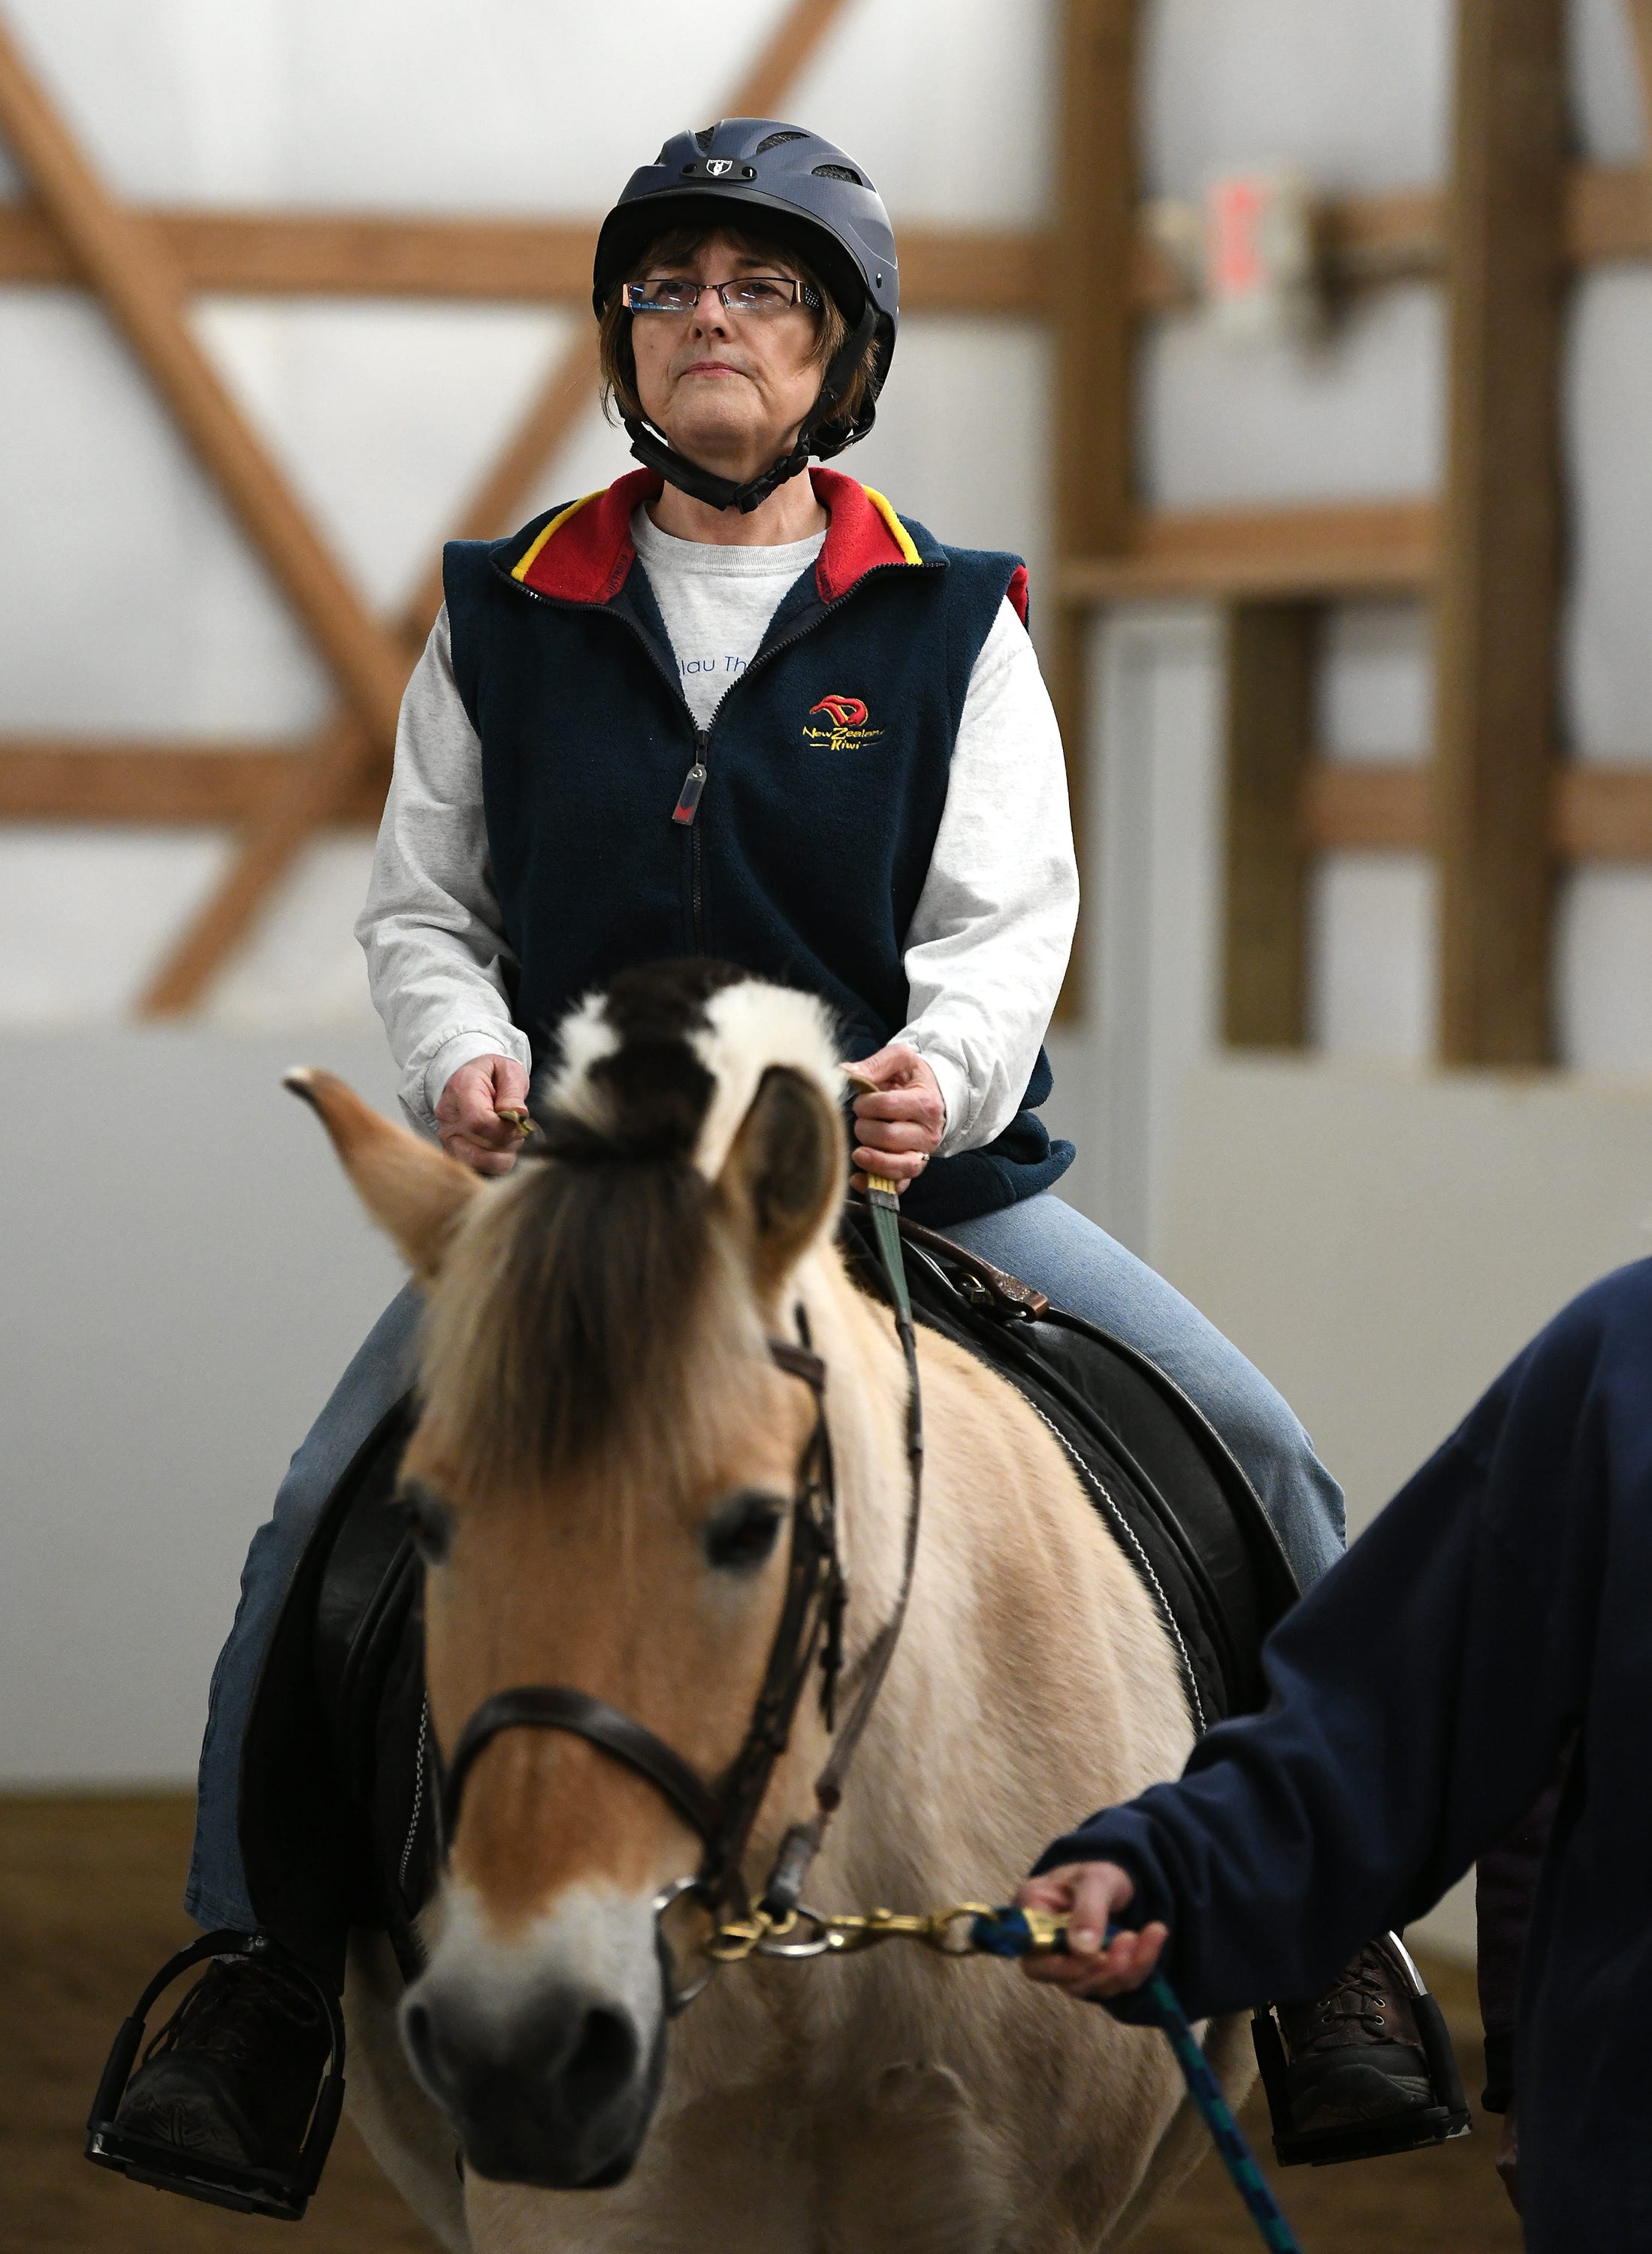 Deb Swartz makes her way around the riding ring on the horse Sigbjorn.